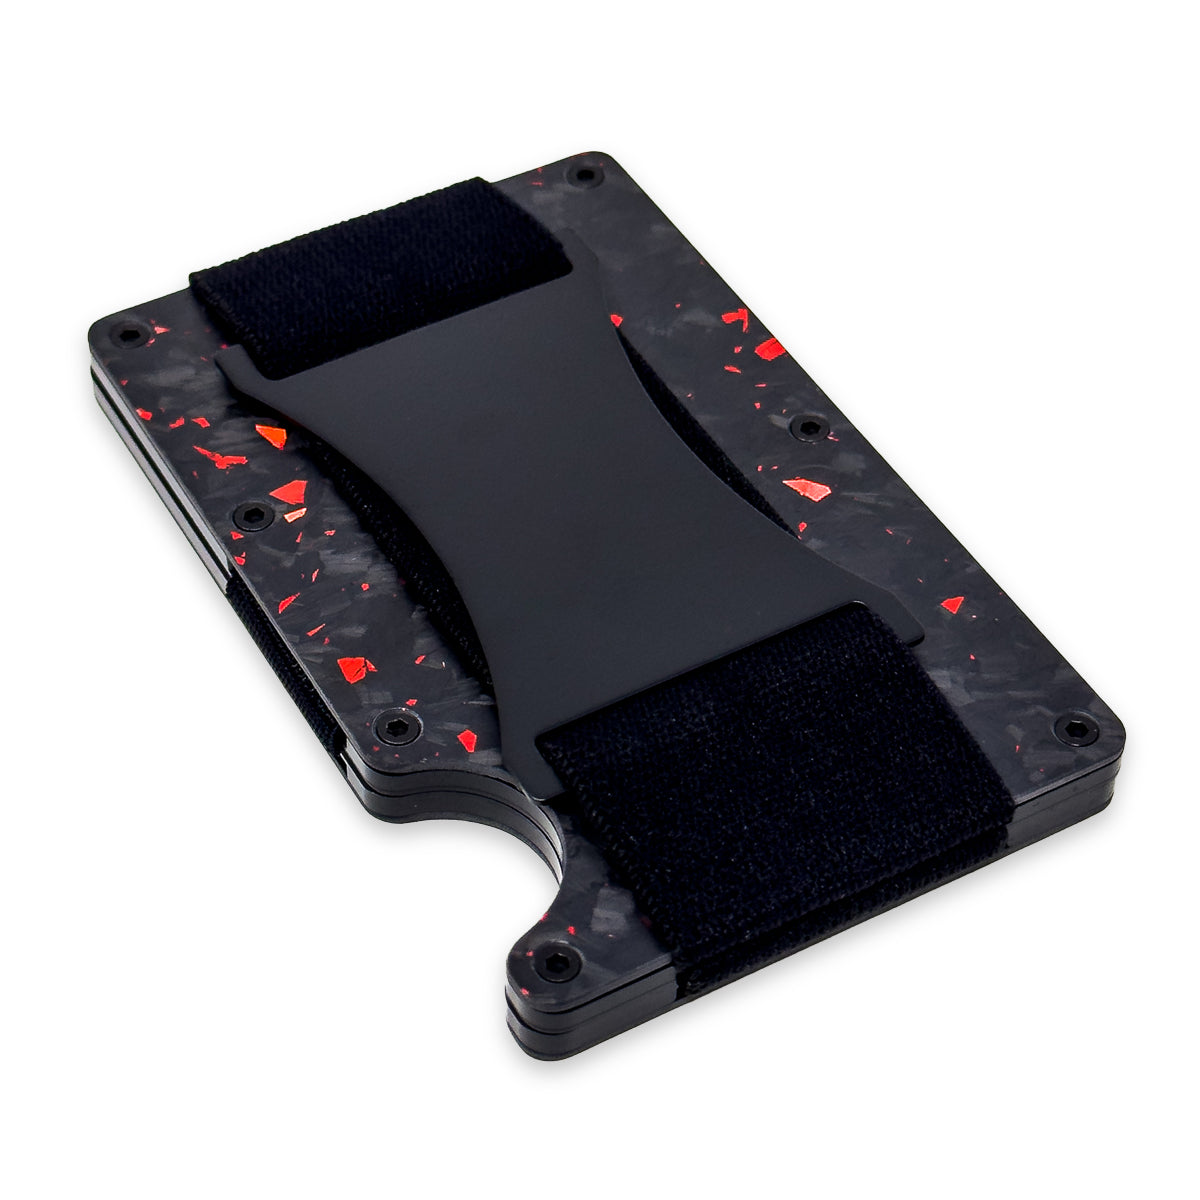 717 Supply Forged Carbon Wallet - Black & Red